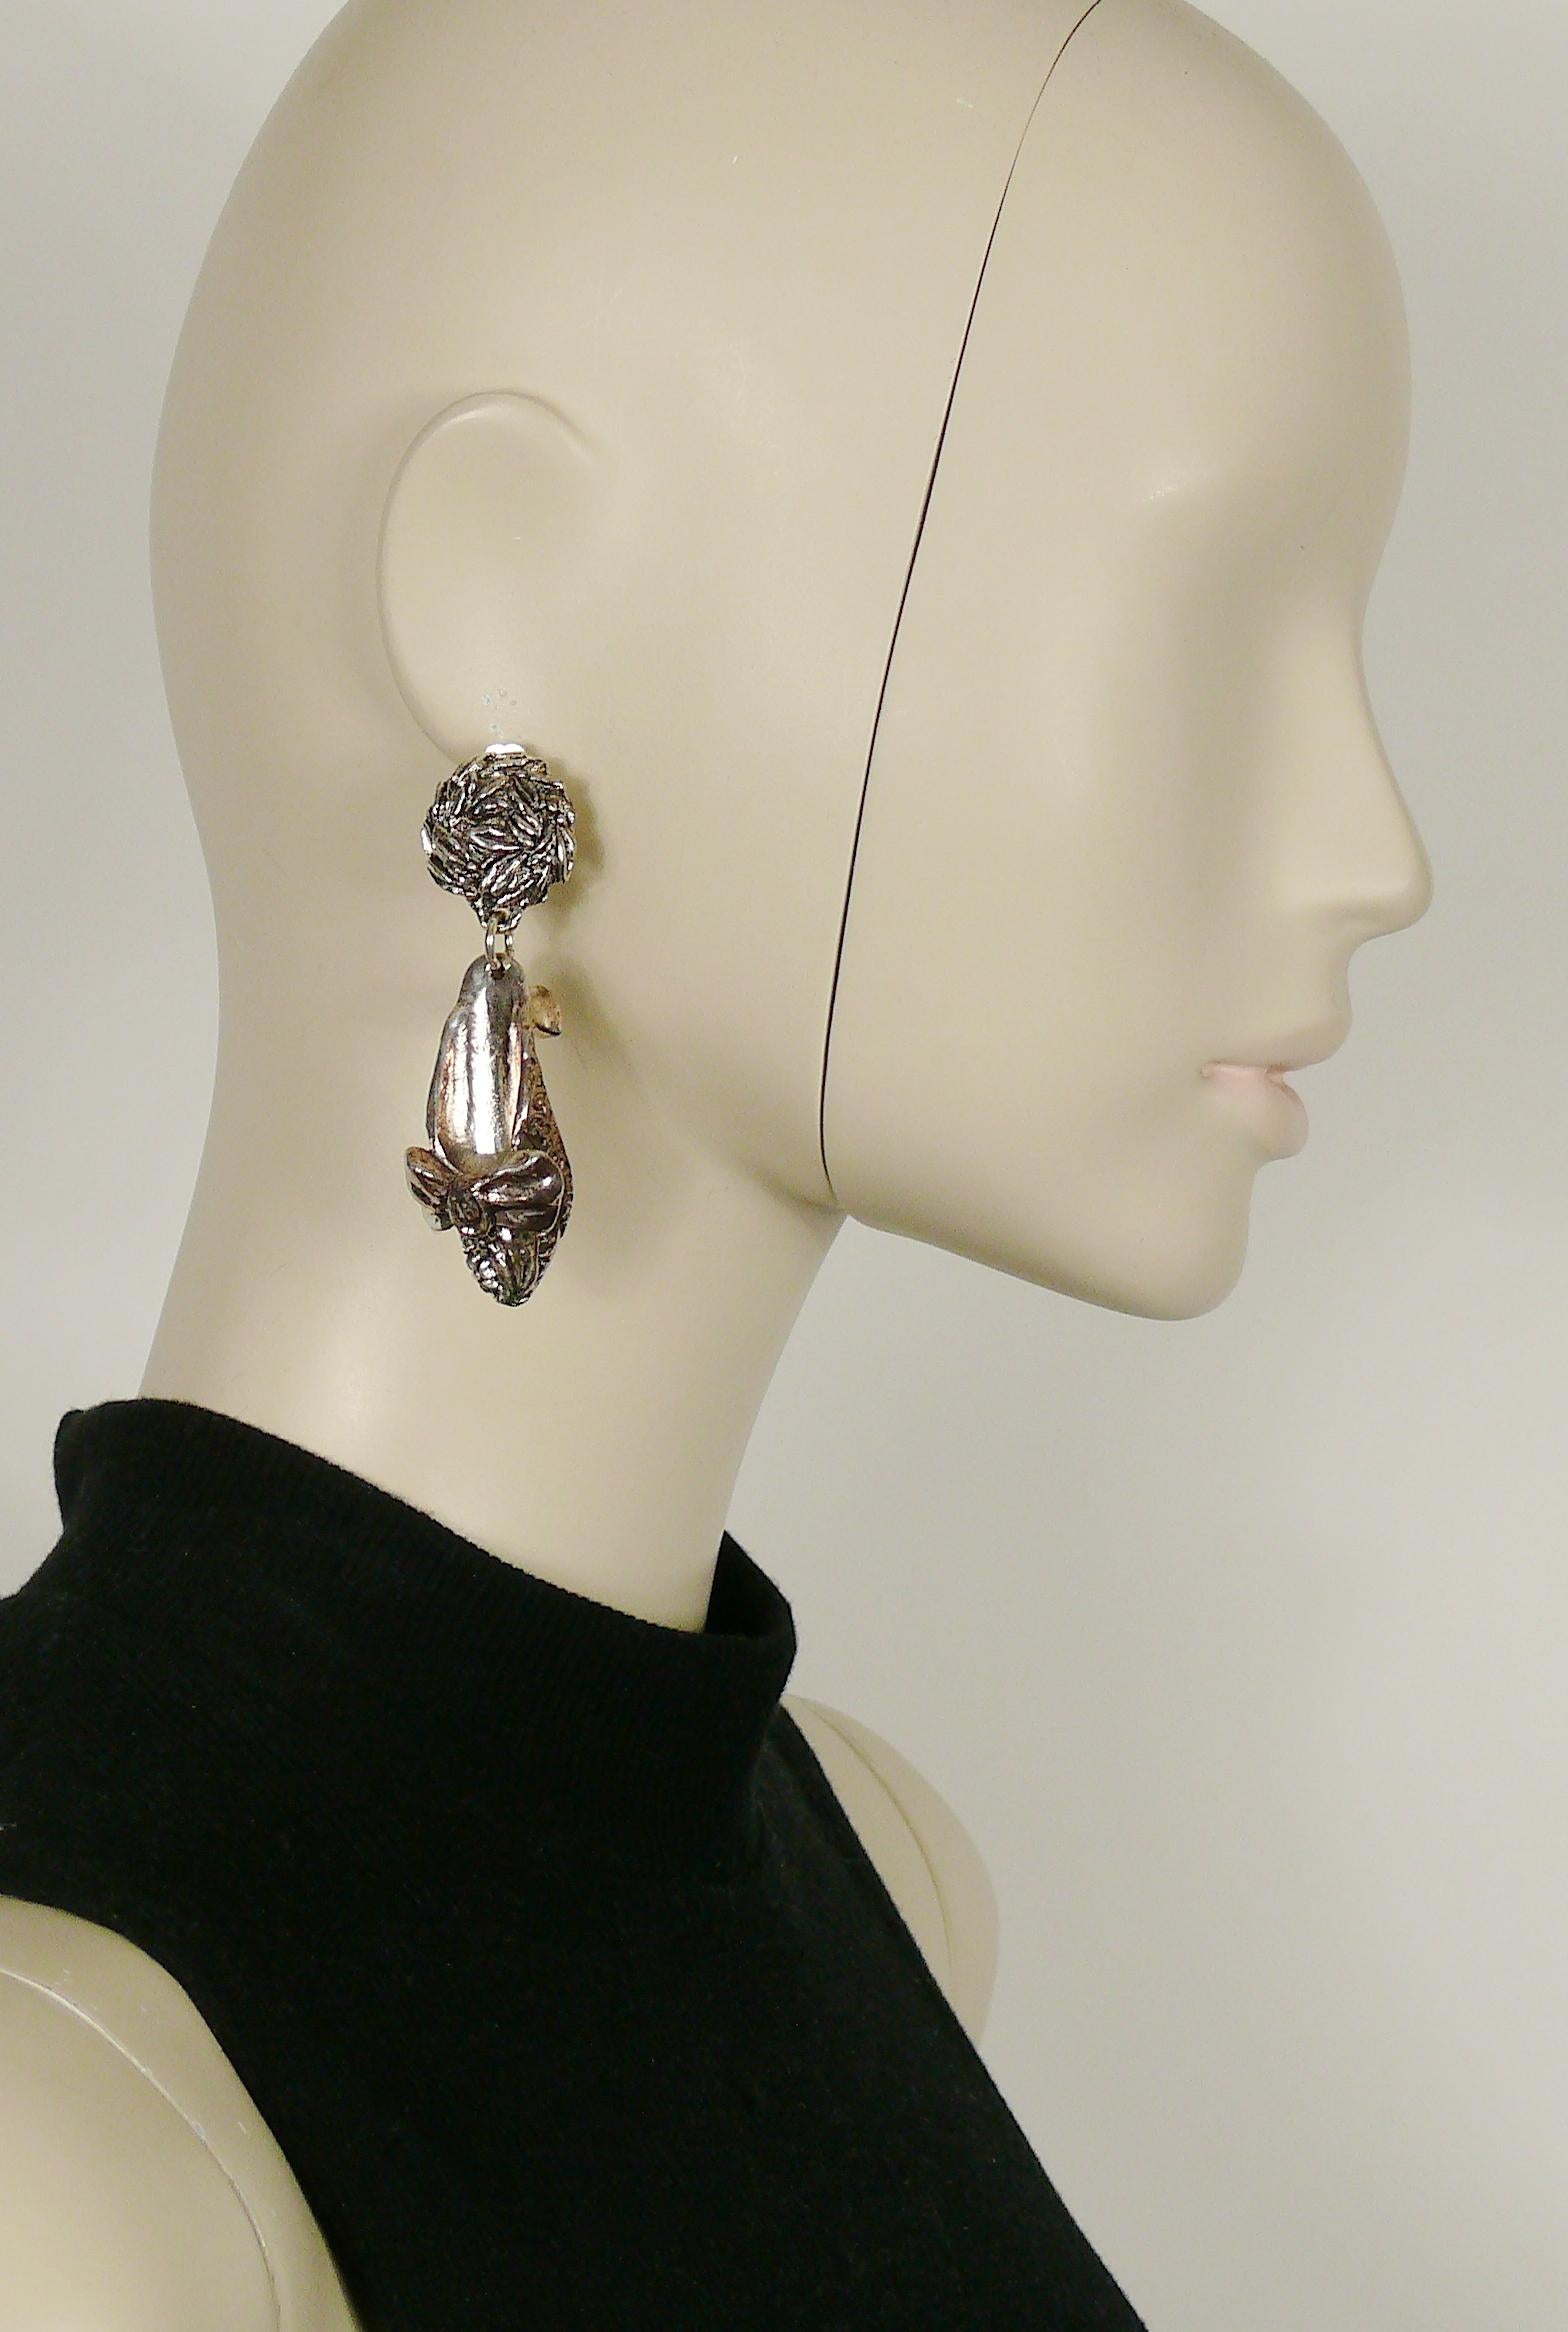 CHANTAL THOMASS vintage rare novelty dangling earrings (clip-on) featuring resin shoes in silver tone with antiqued patina.

Embossed CHANTAL THOMASS.

Indicative measurements : height approx. 7.5 cm (2.95 inches) / max. width 2 cm (0.79